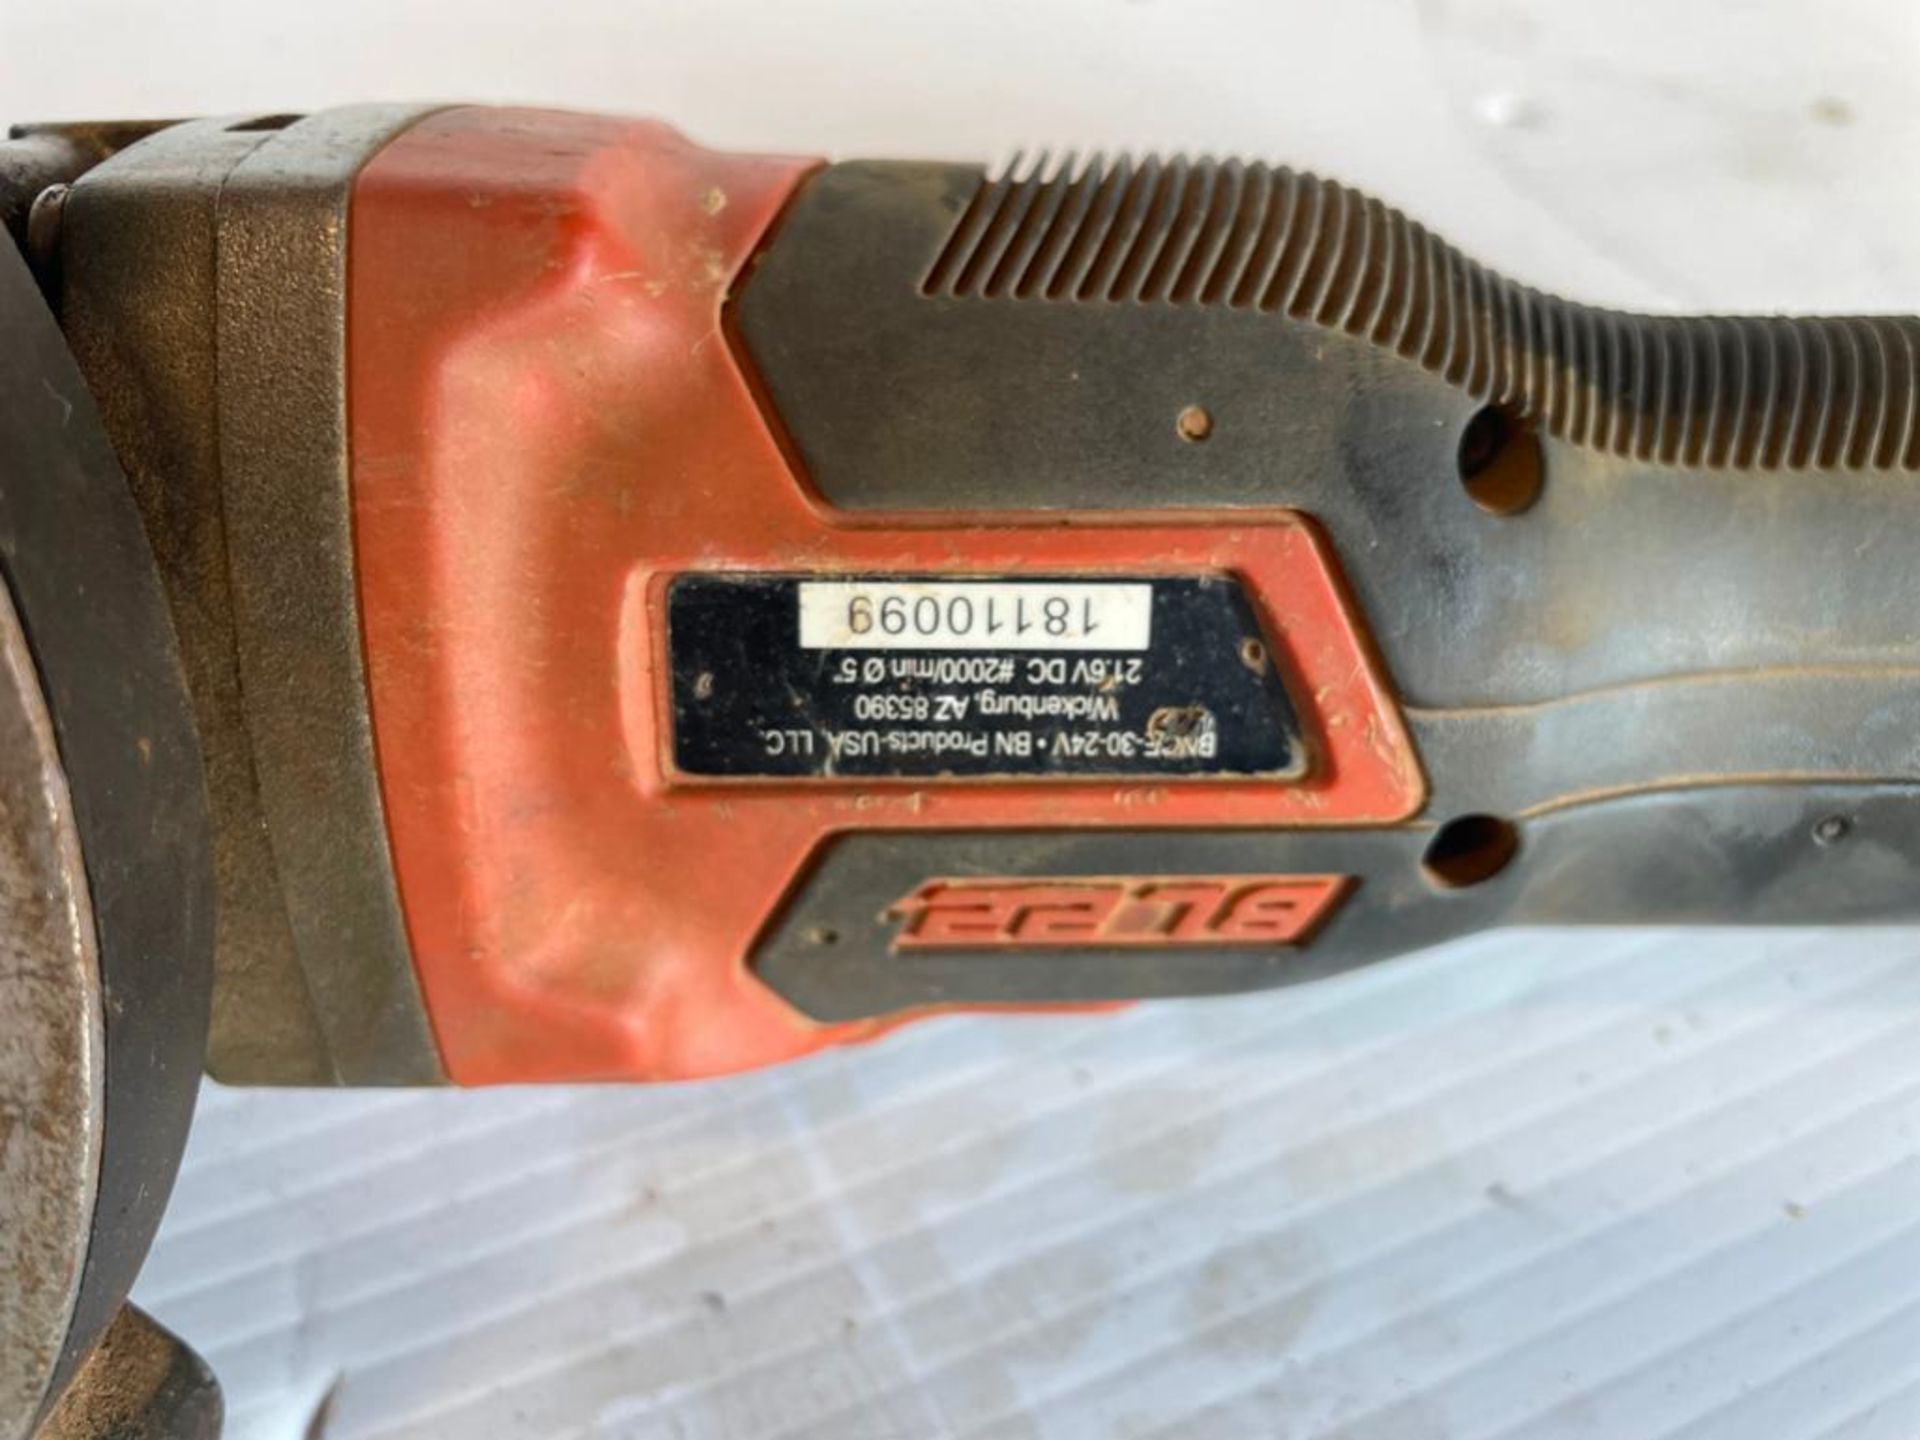 BN Products BL22 Cordless Rebar Cutter, Serial #18110099, 24V with Charger in Case. Located in Hazel - Image 7 of 10